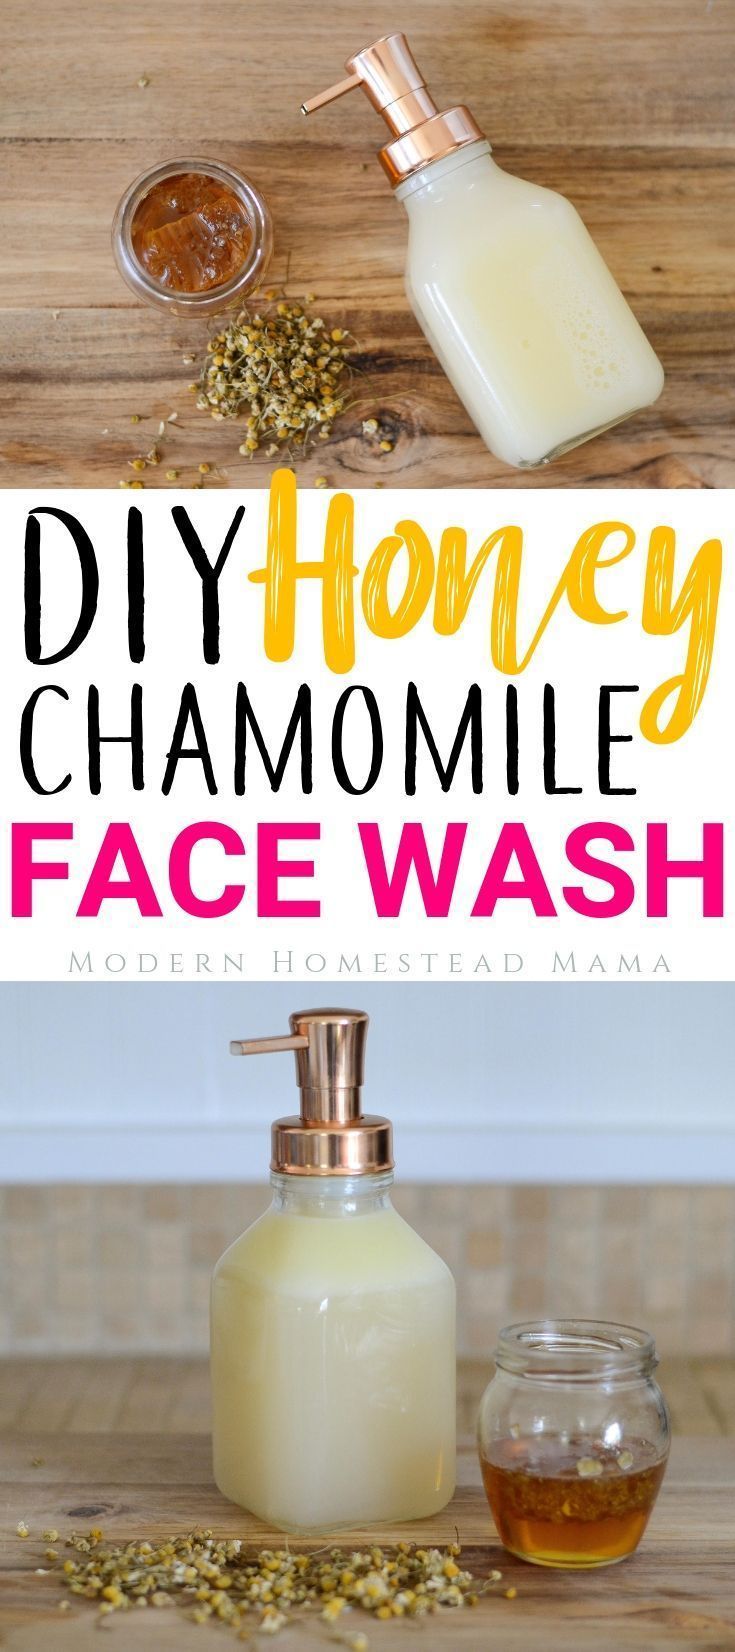 DIY Face Wash - Honey Chamomile For Sensitive Skin and Anti-Aging -   14 skin care Homemade anti aging ideas